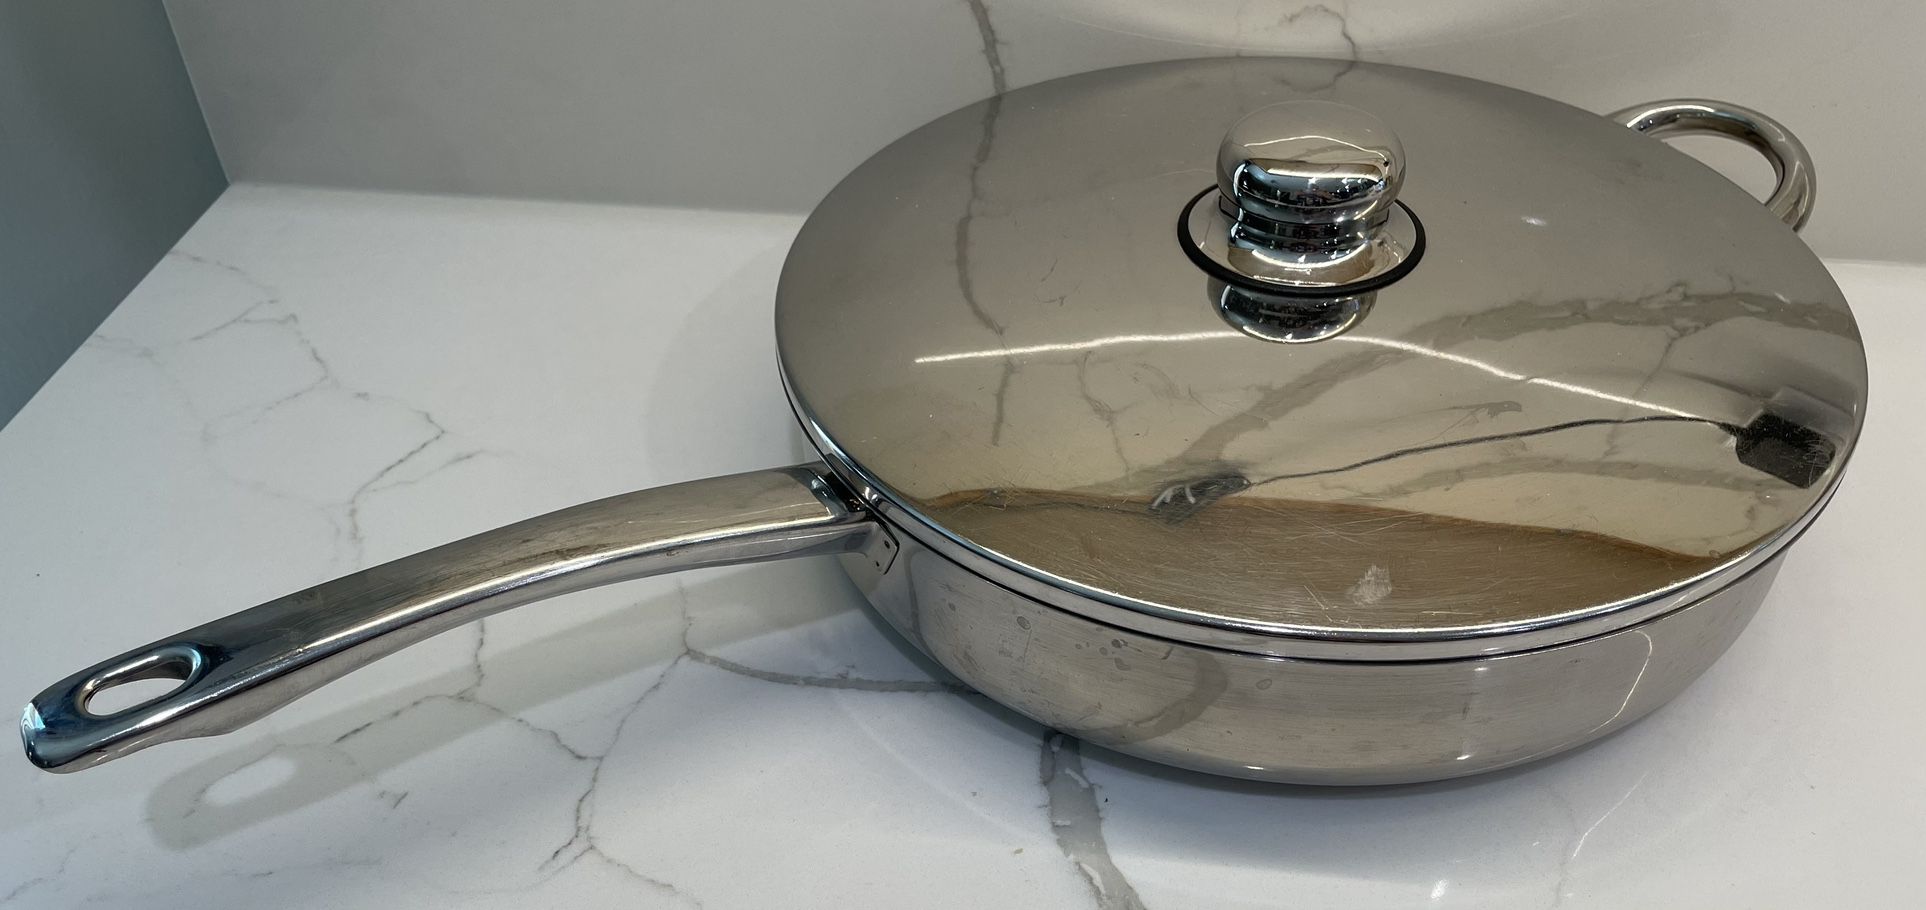 Thomas Rosenthal Group Professional Cookware Saute Pan for Sale in Norwalk,  CA - OfferUp